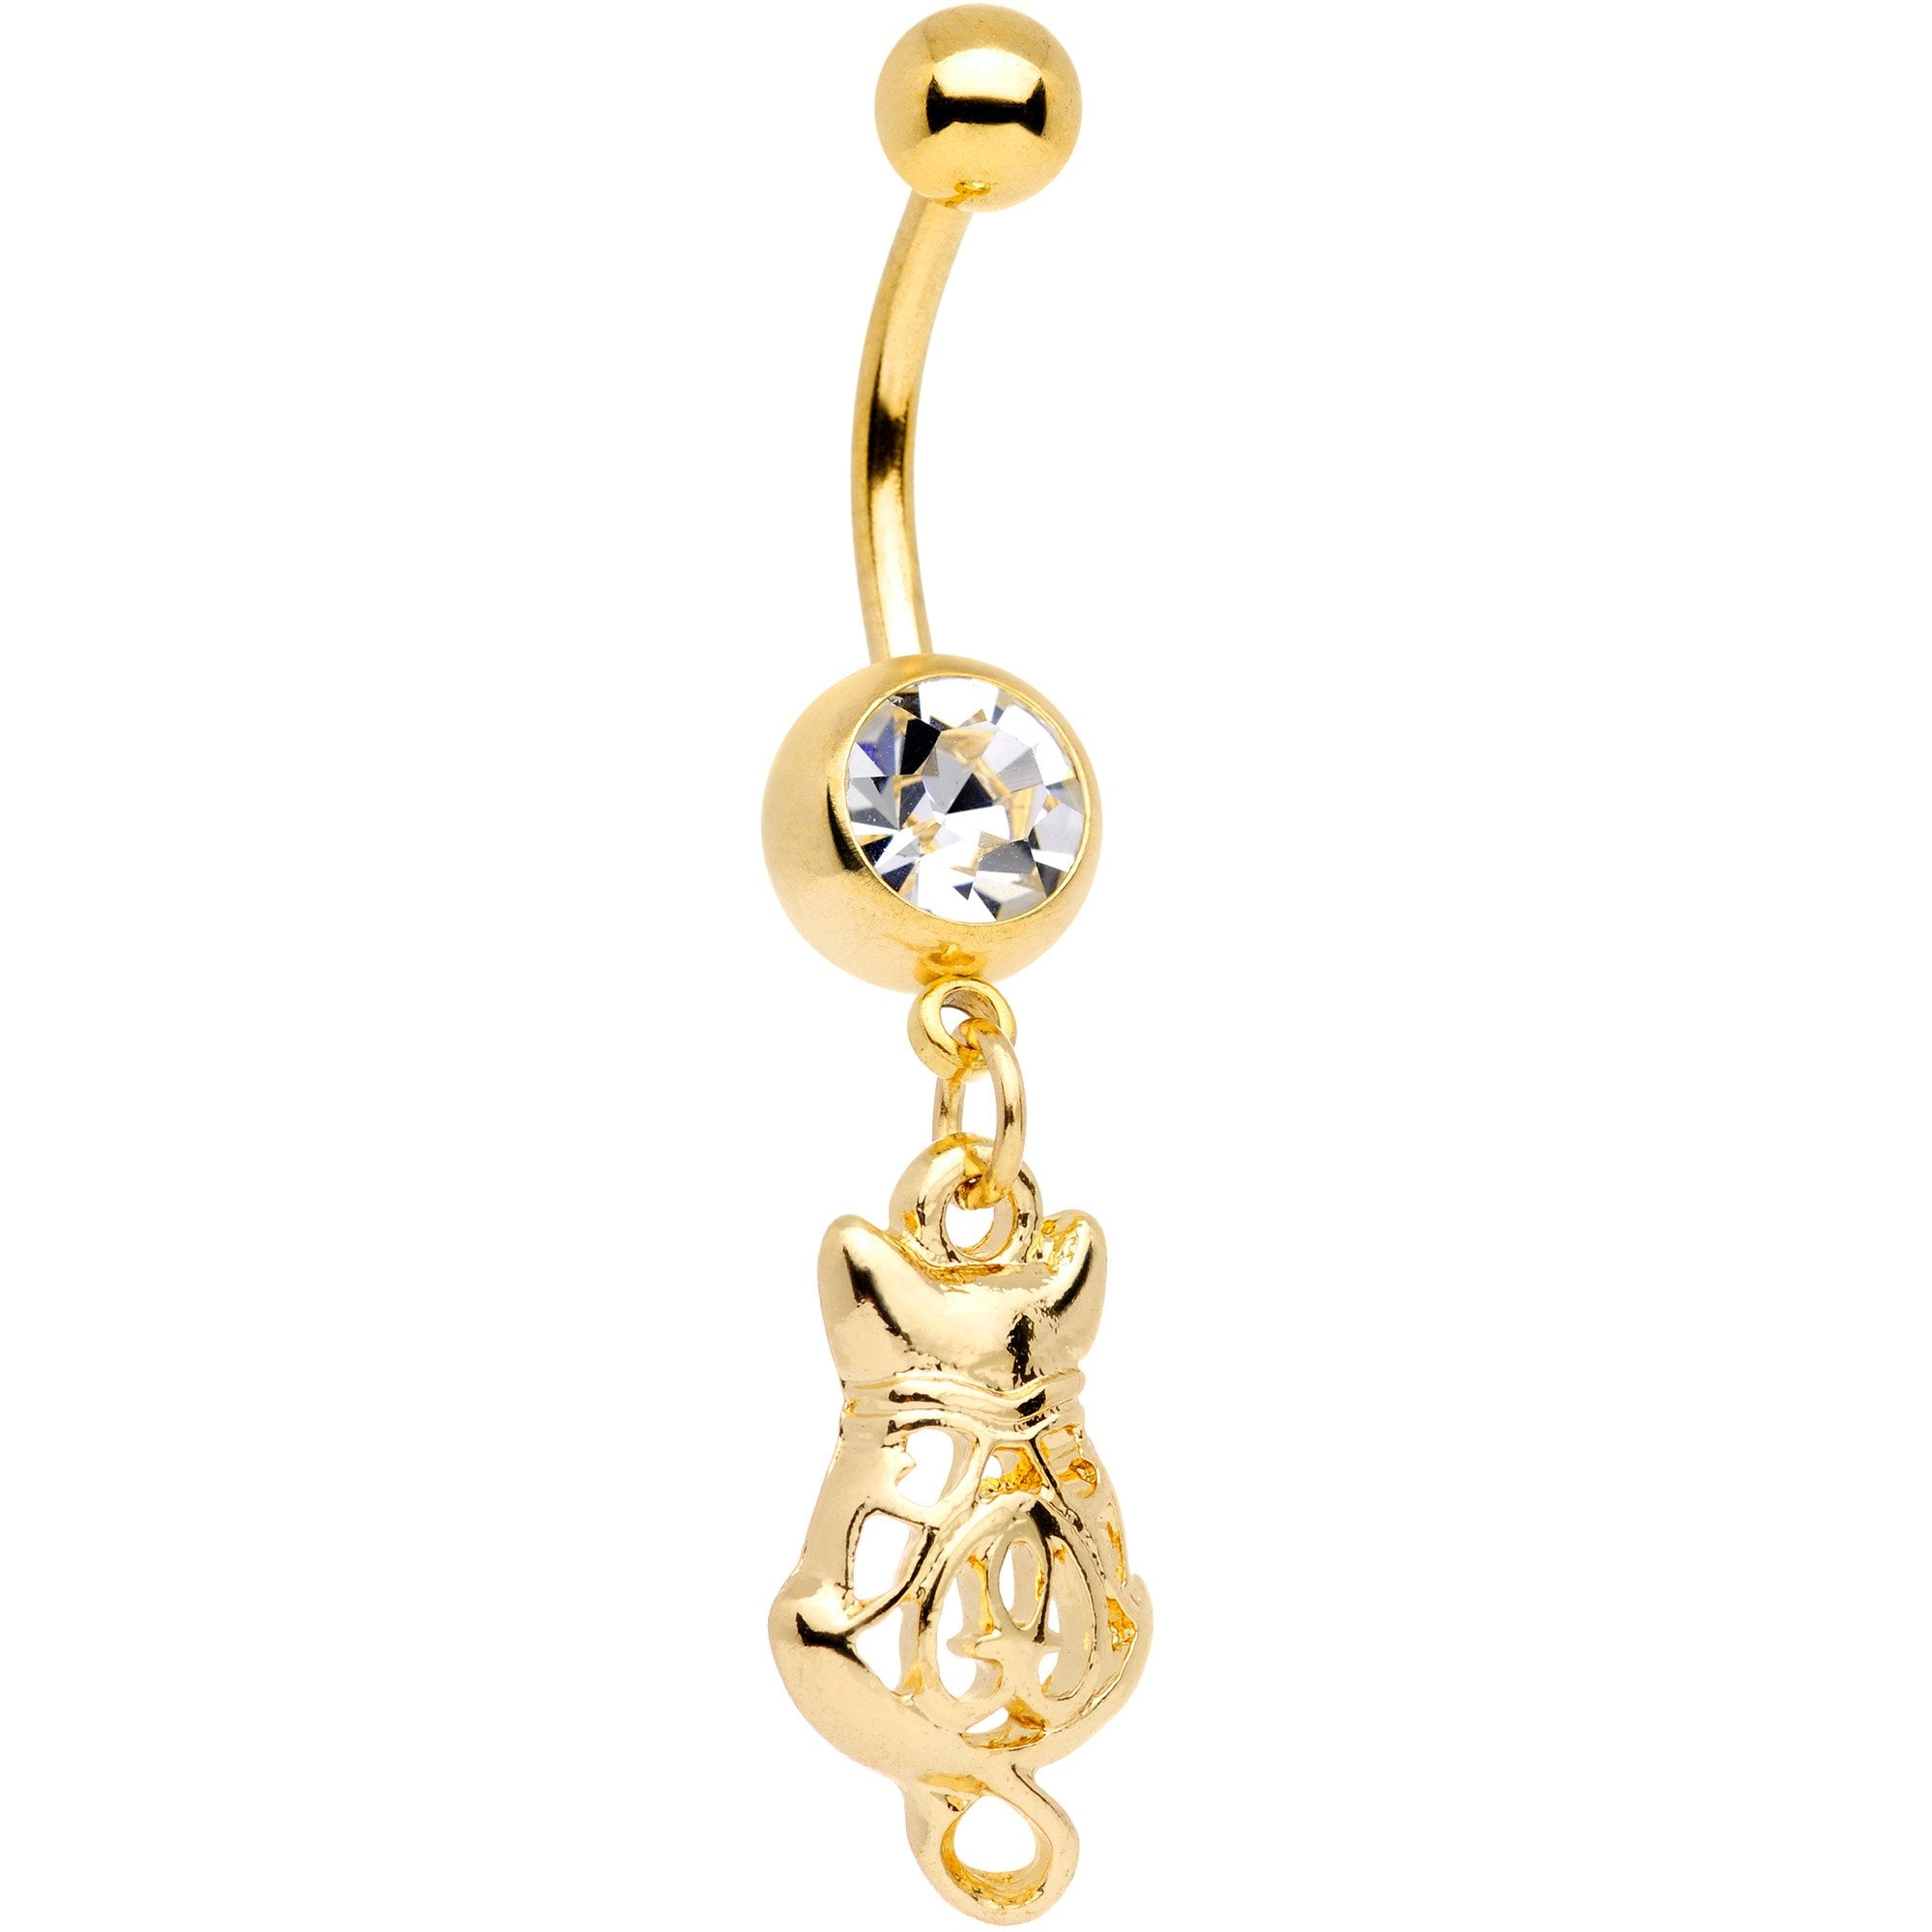 Clear Gem Gold Tone Anodized Fashion Cat Dangle Belly Ring